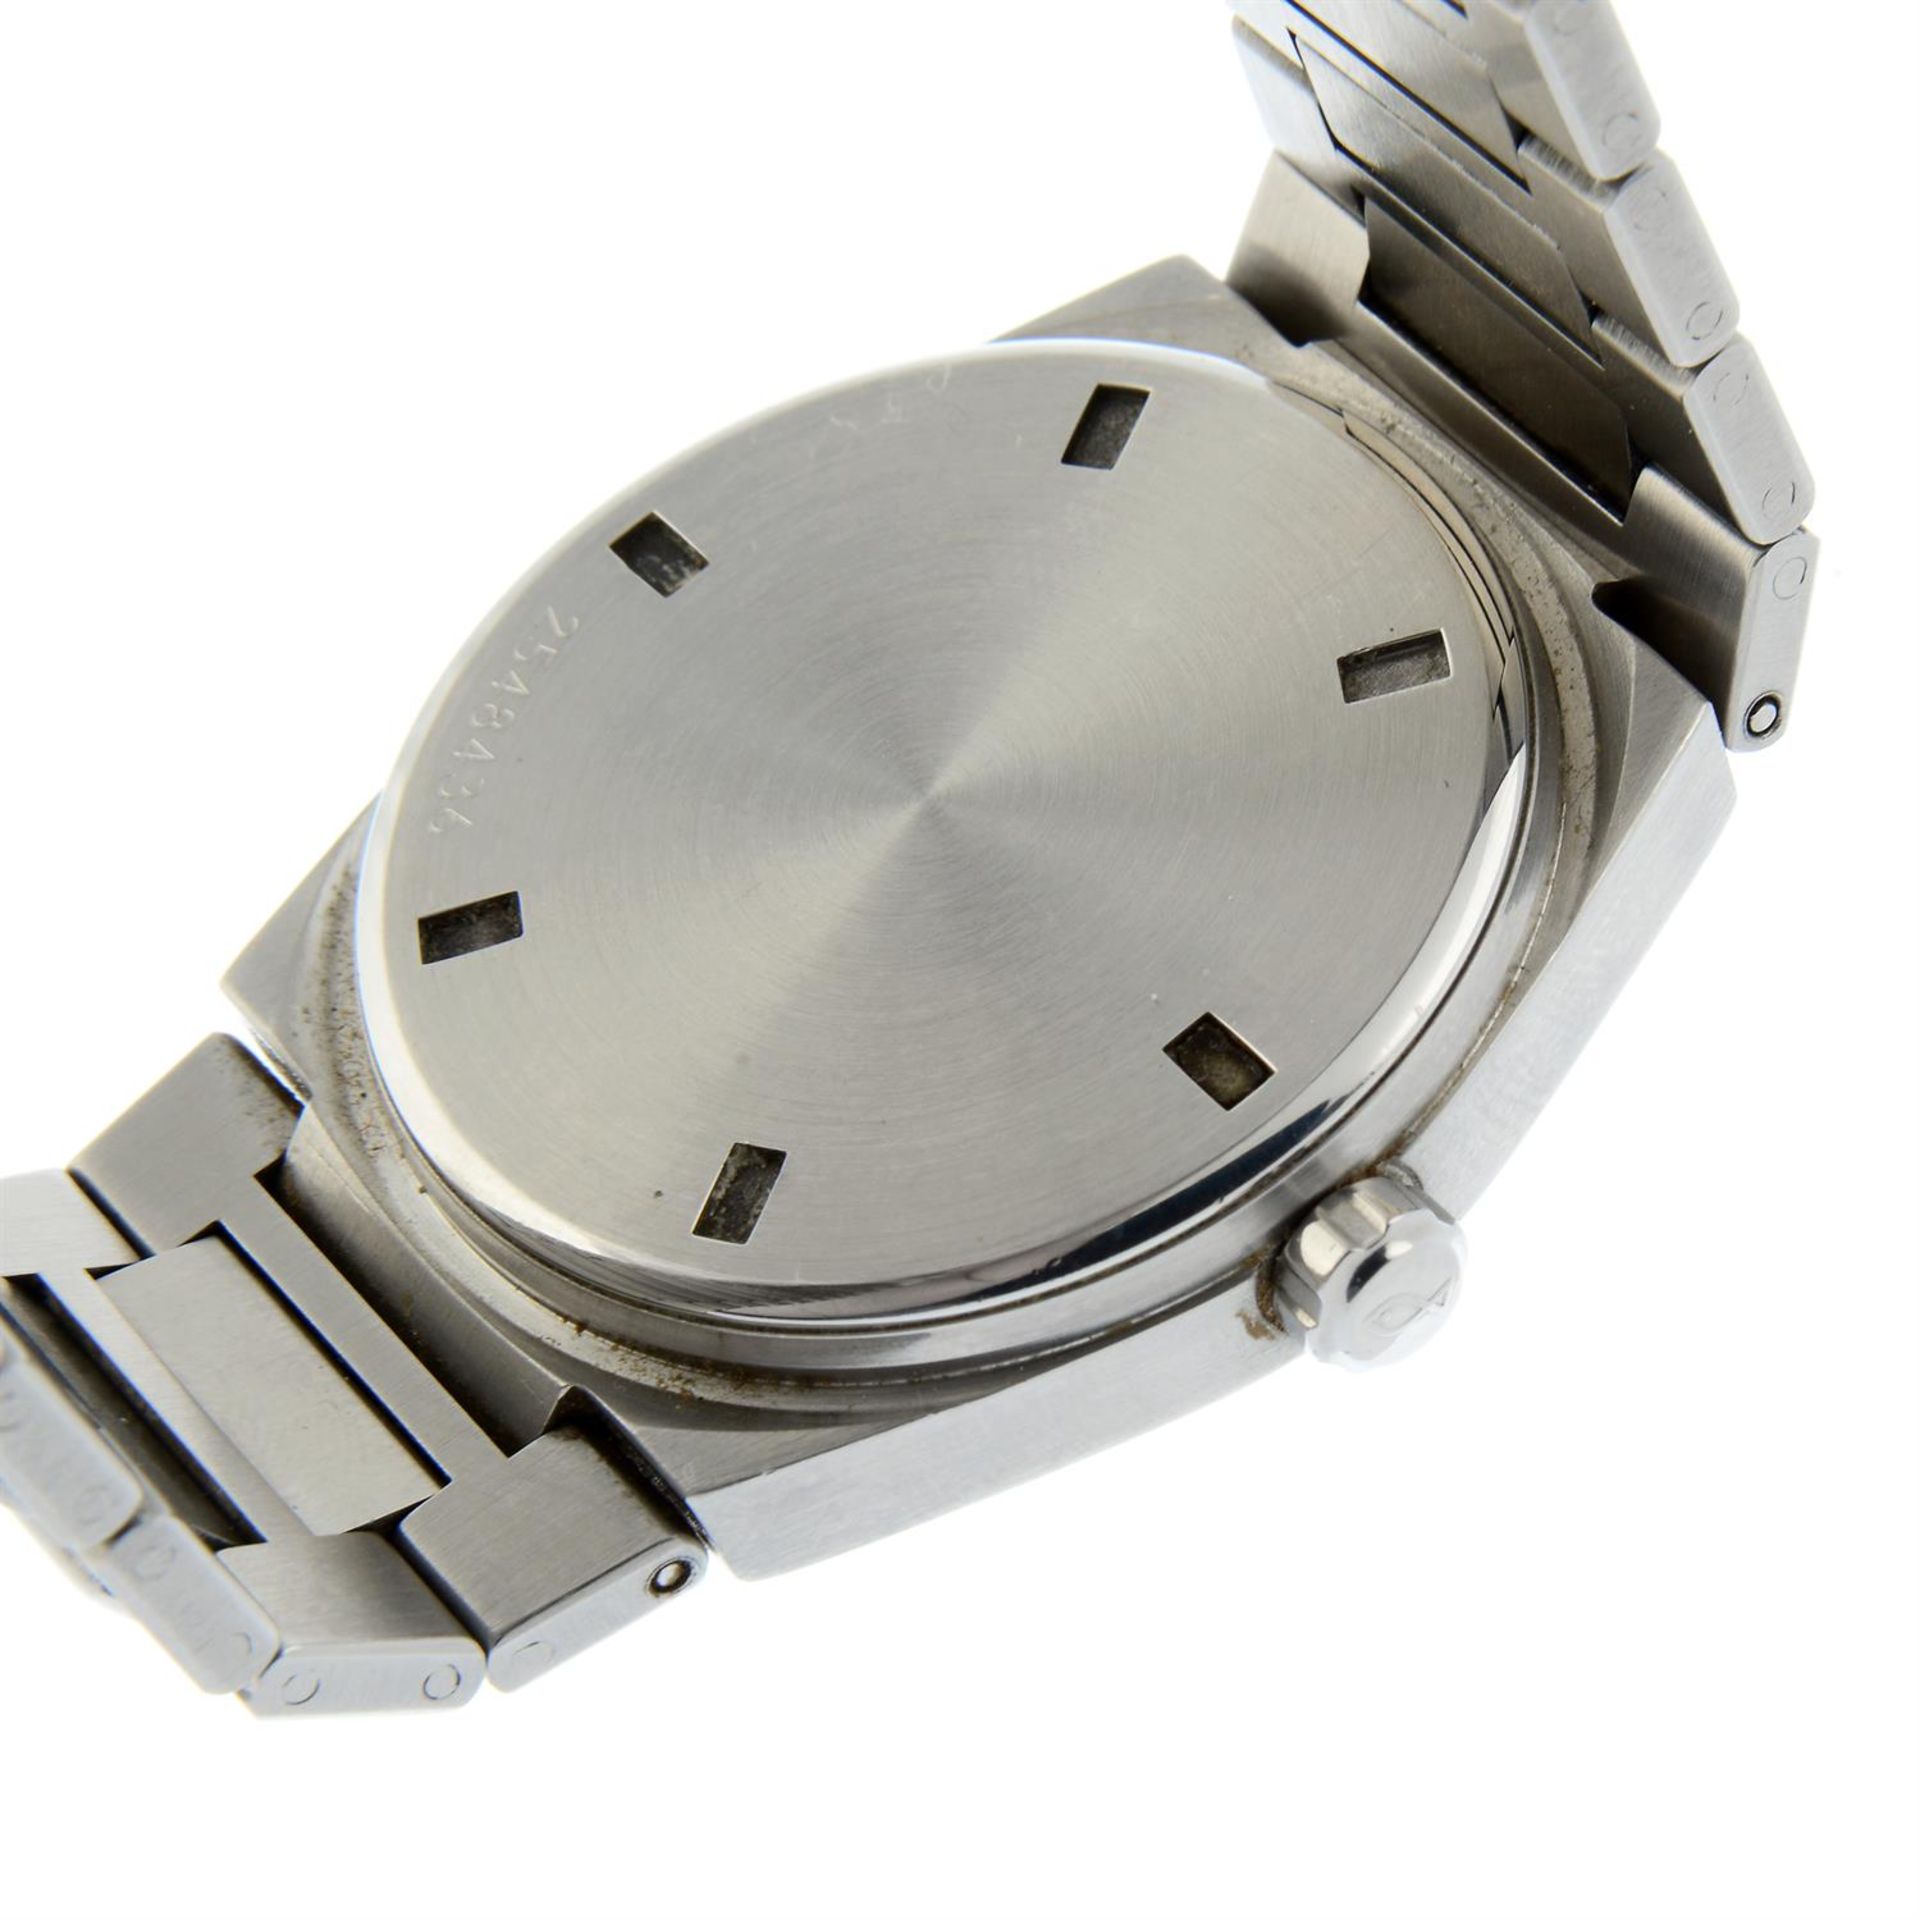 IWC - a stainless steel Ingenieur bracelet watch, 34mm. - Image 4 of 5